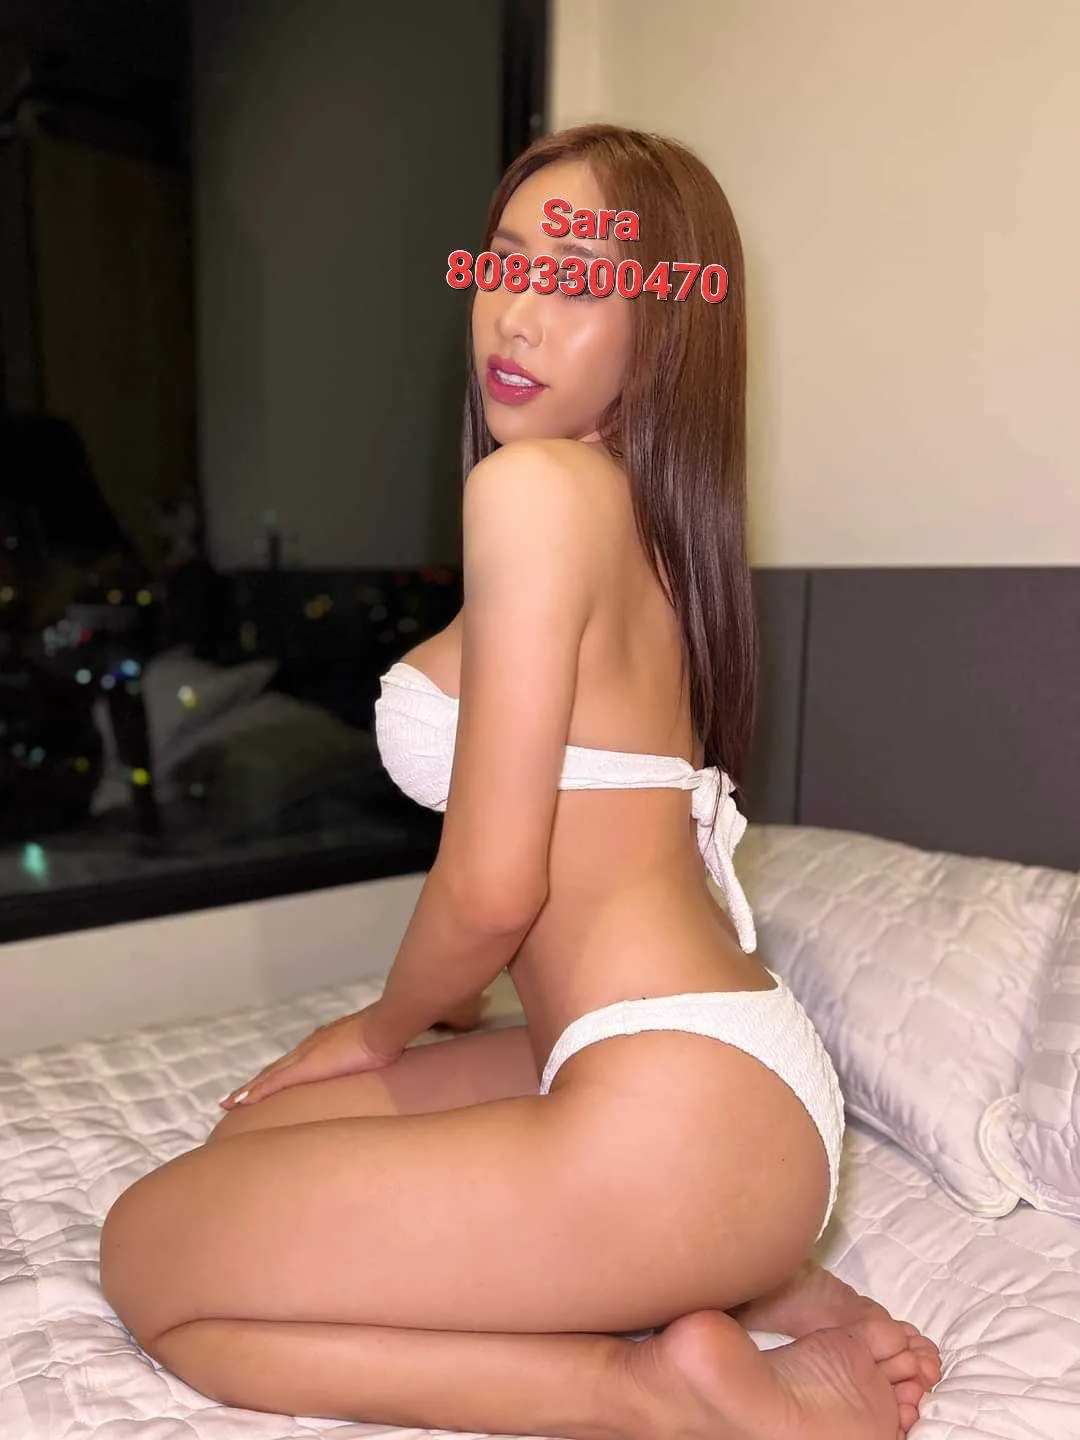 Reviews about escort with phone number 8083300470